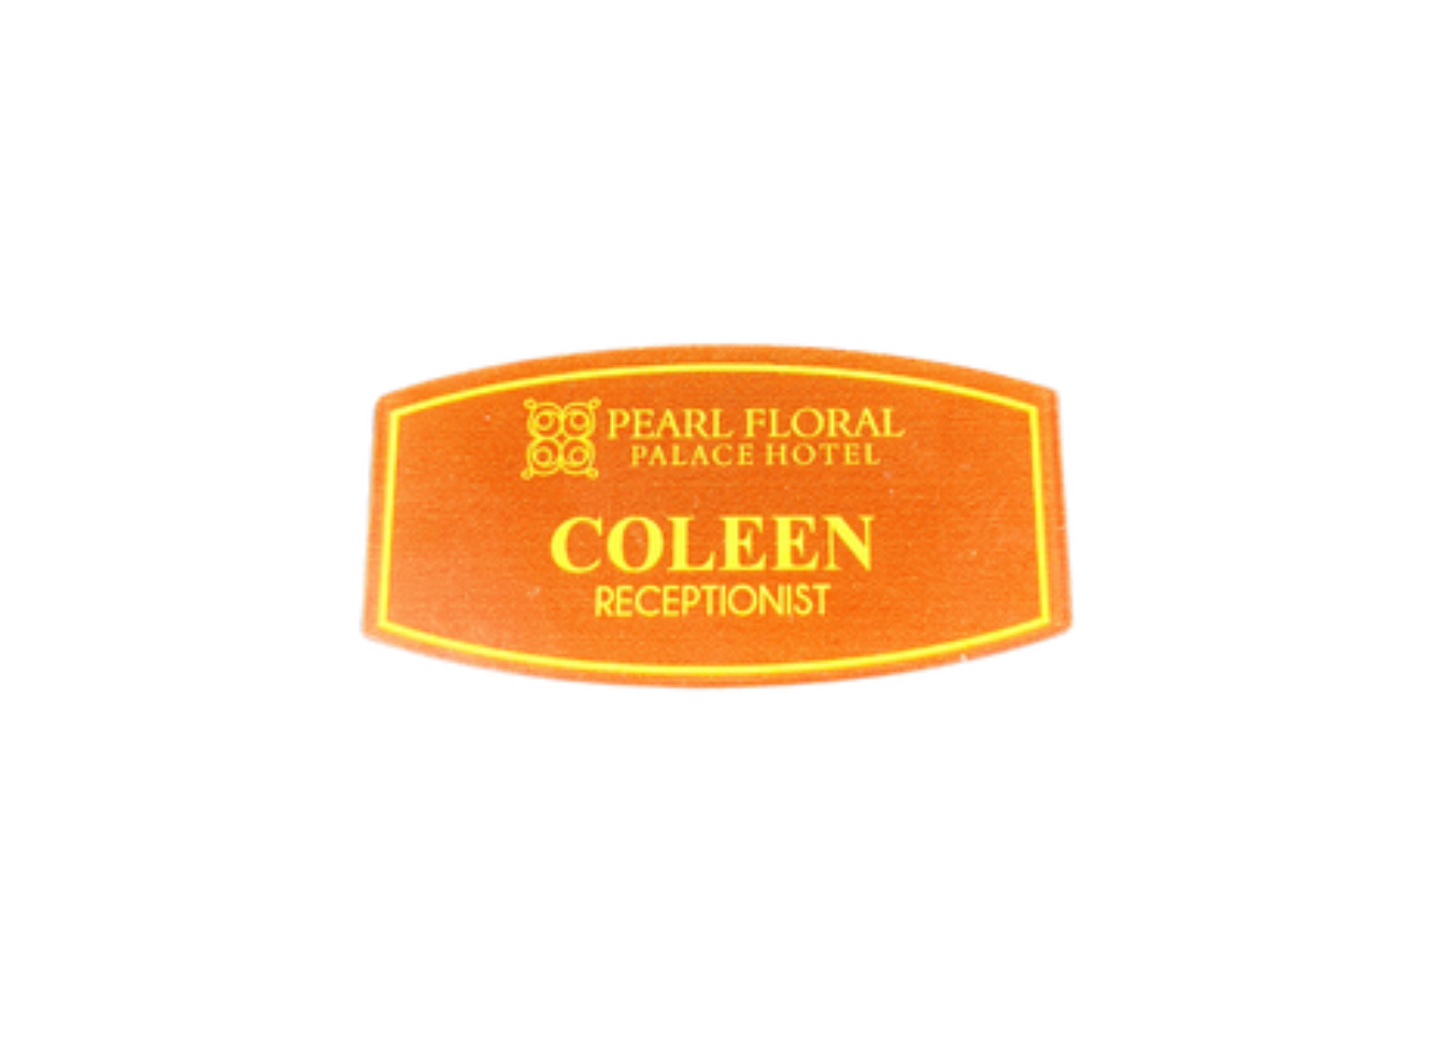 Code No.: 5141                        _                  Size: 1.5" x 3.0"                Printed_Nameplate with Safety Pin